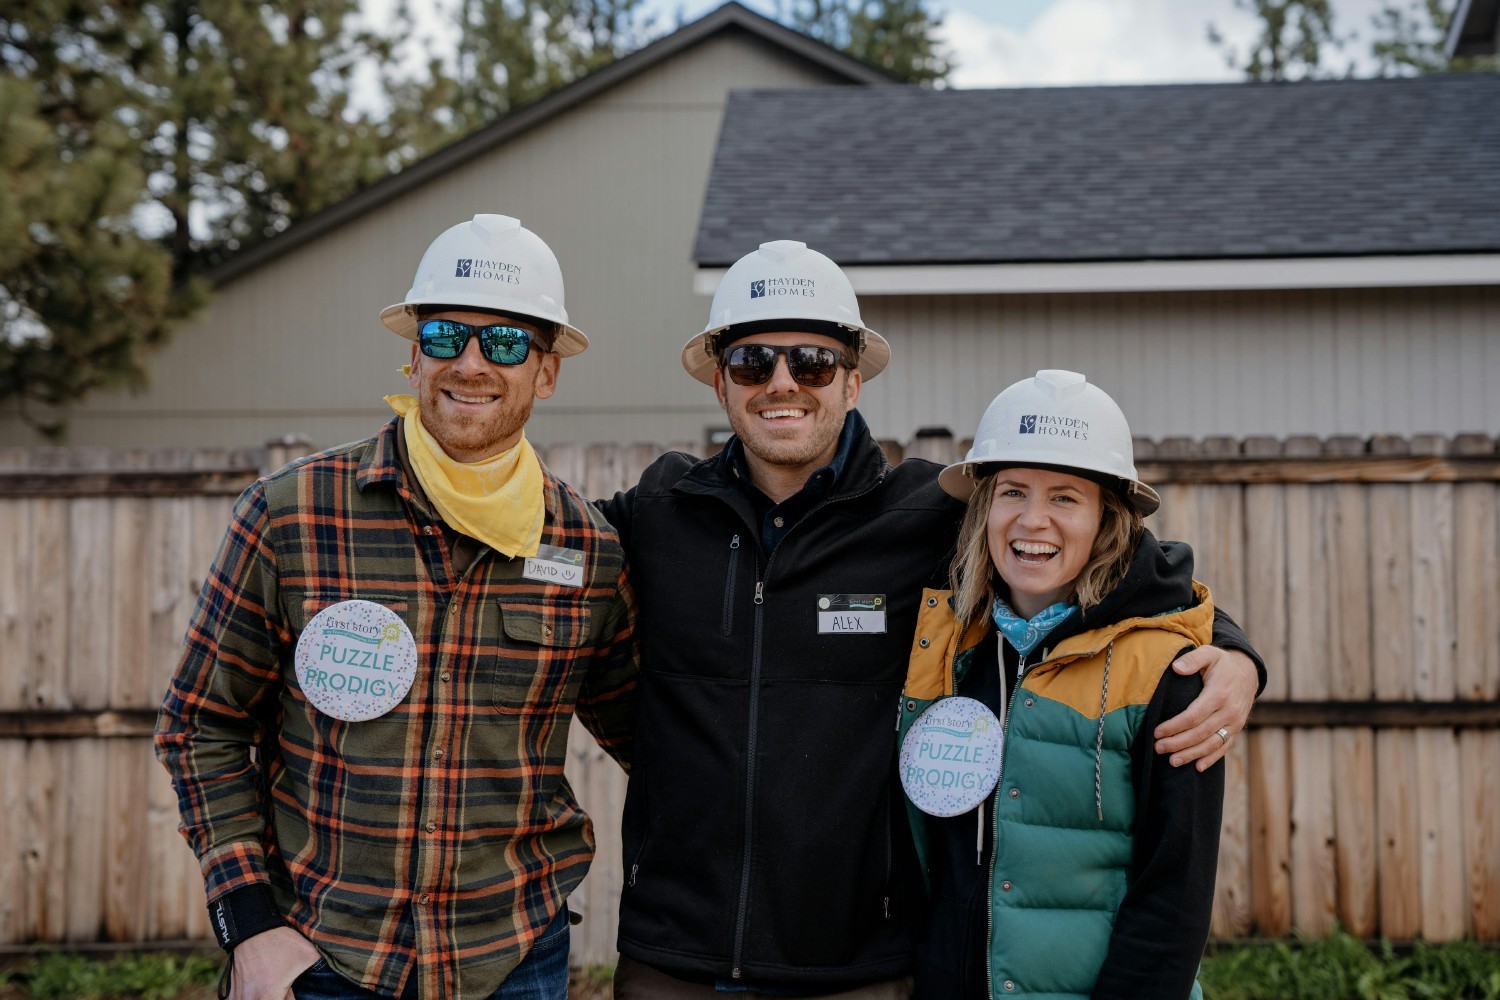 First Story Team Build in Central Oregon, where team members raised walls for a First Story family.